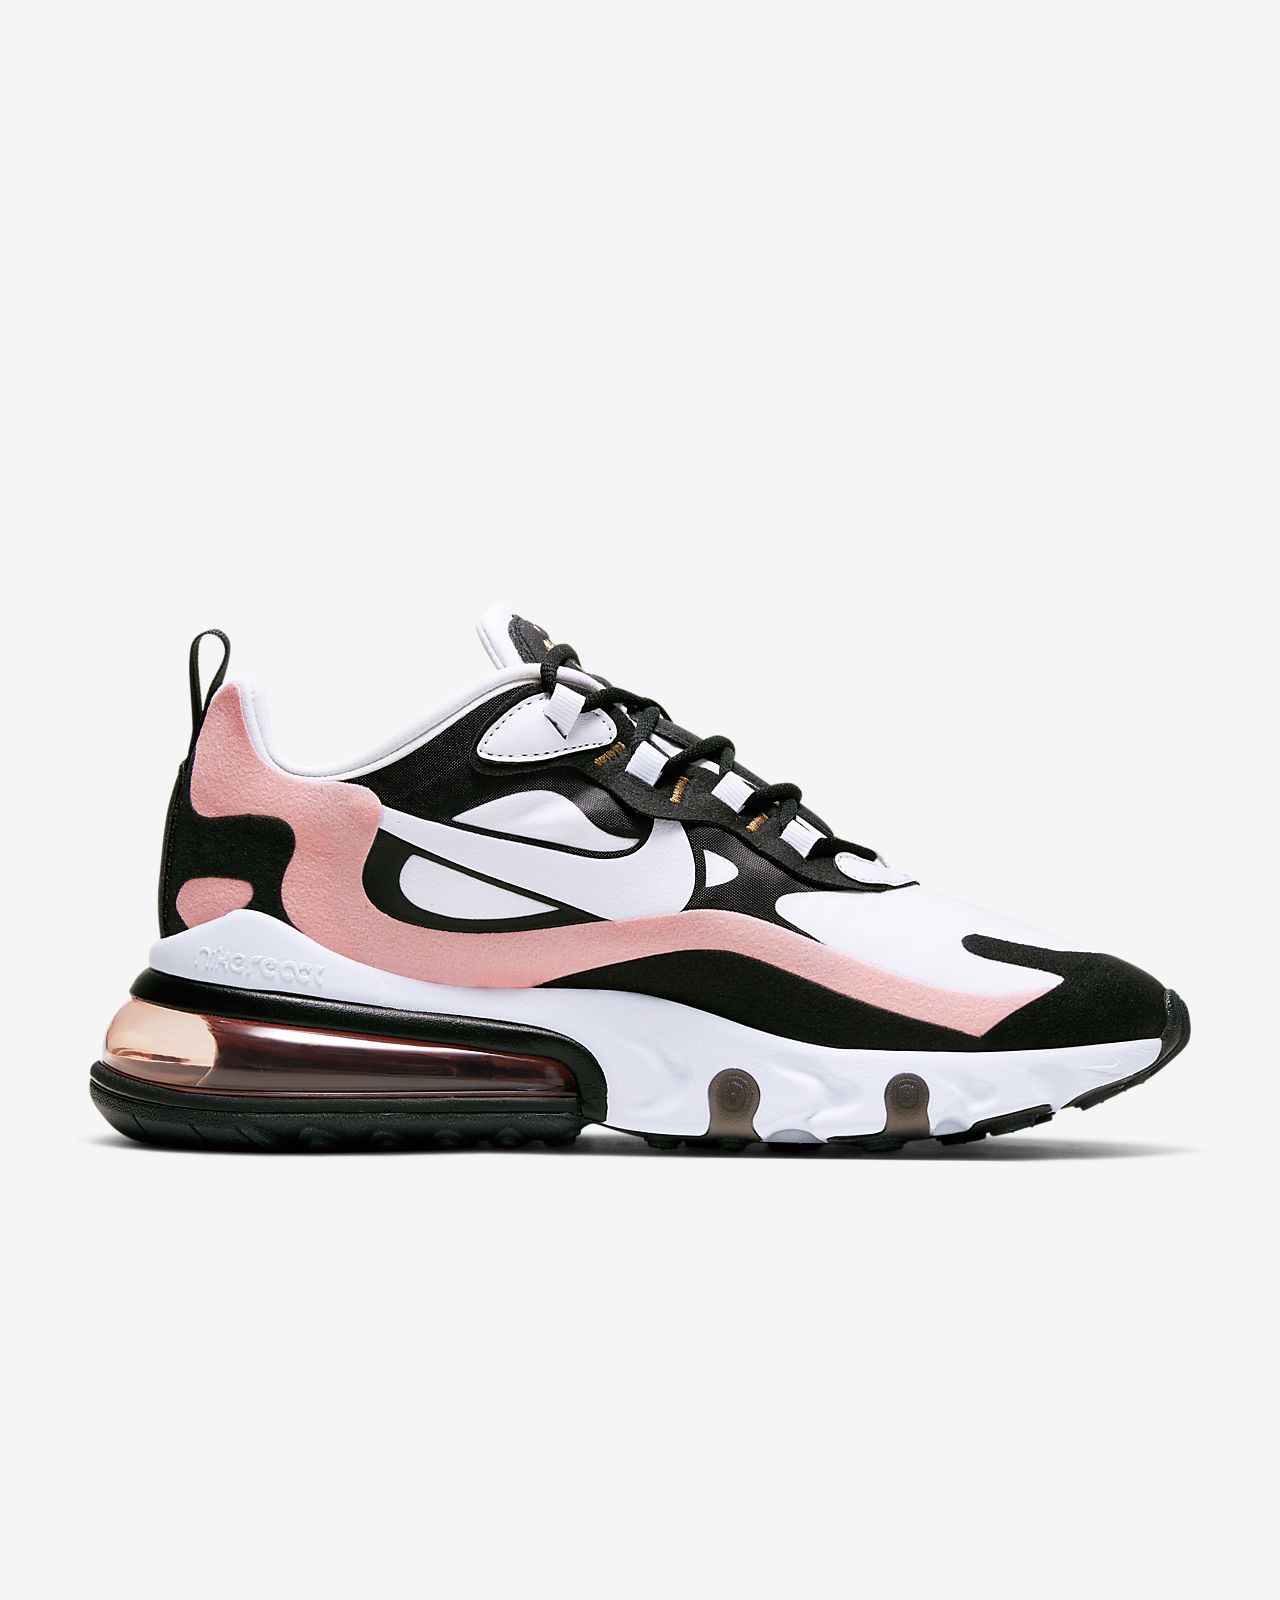 Discount Nike Air Max 97 Ultra Rose Gold Trainers For Sale Online